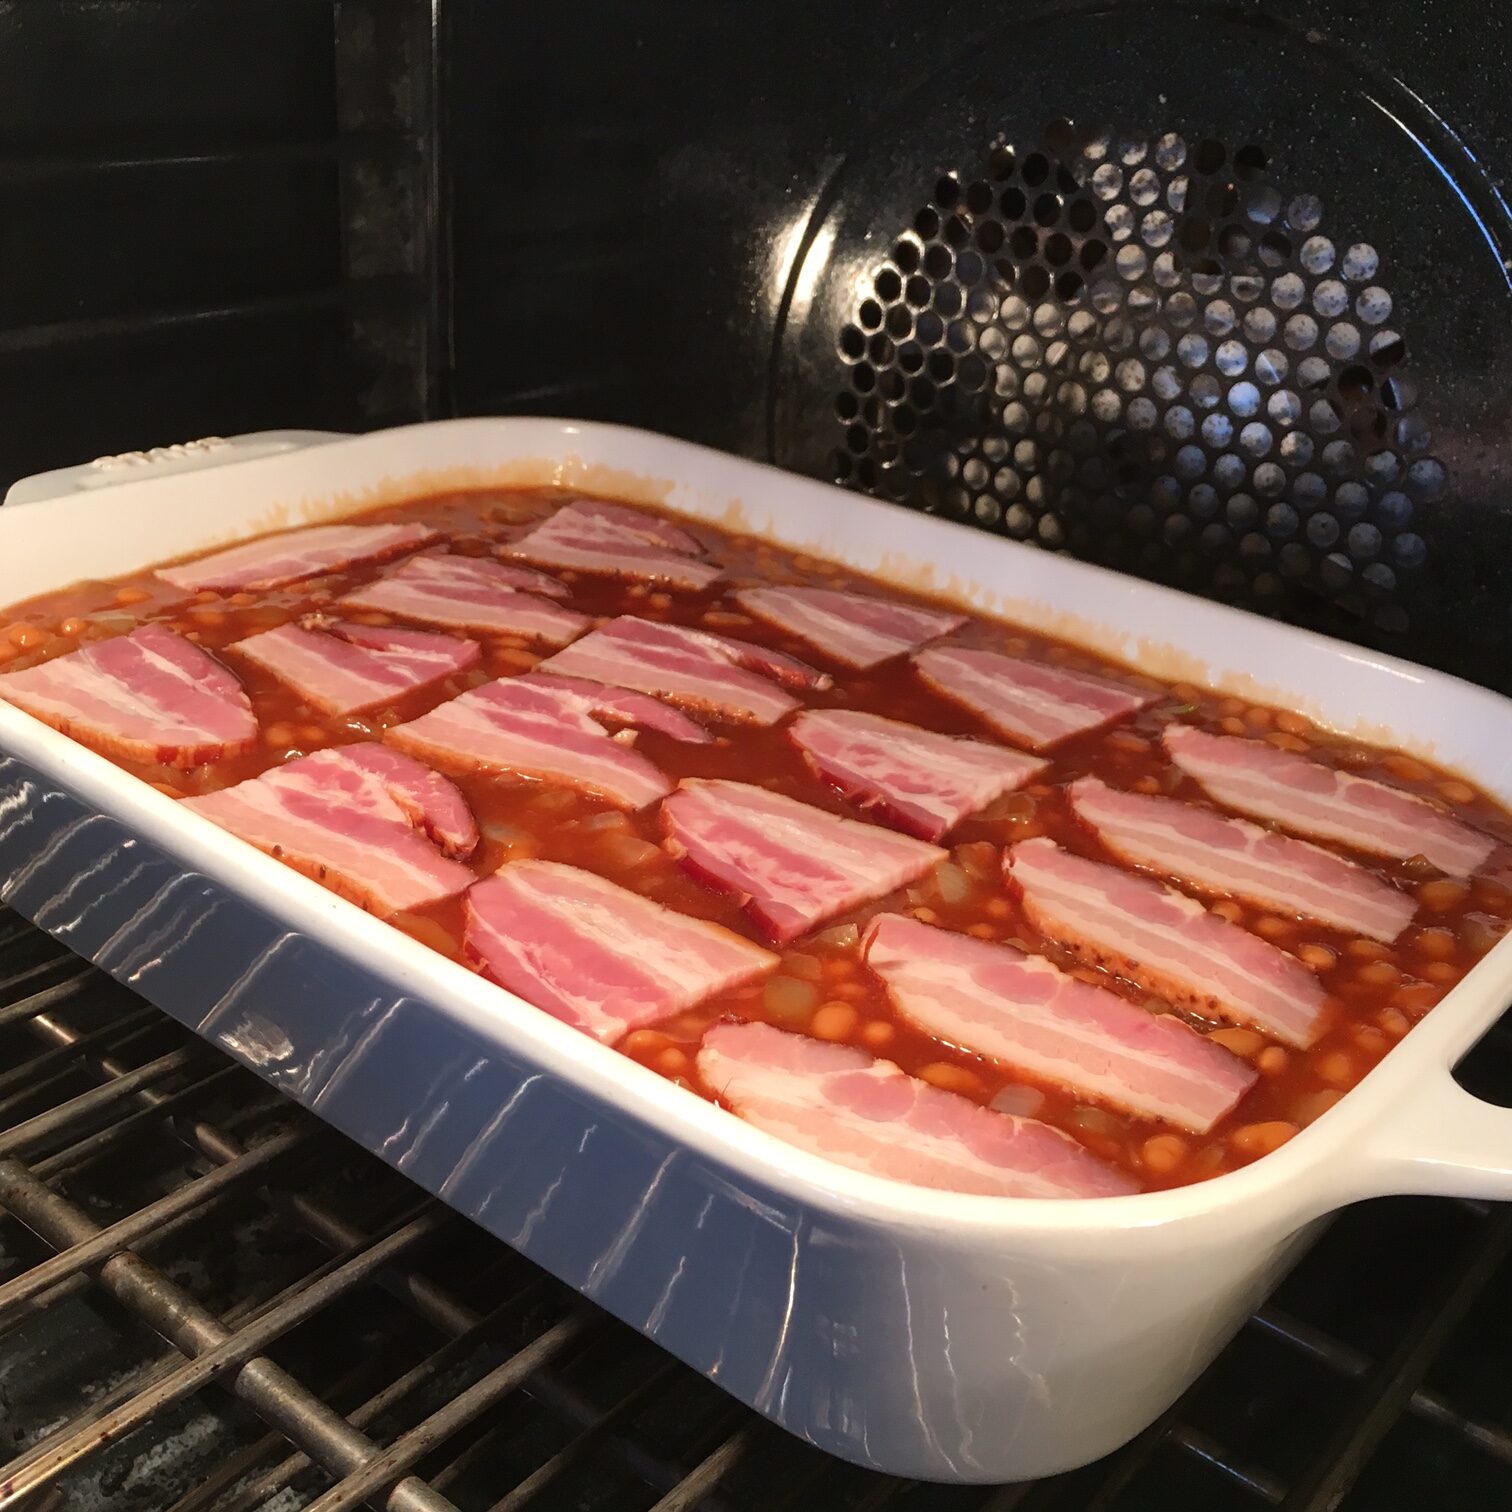 Best Ever Baked Beans placed in the oven, ready to bake.